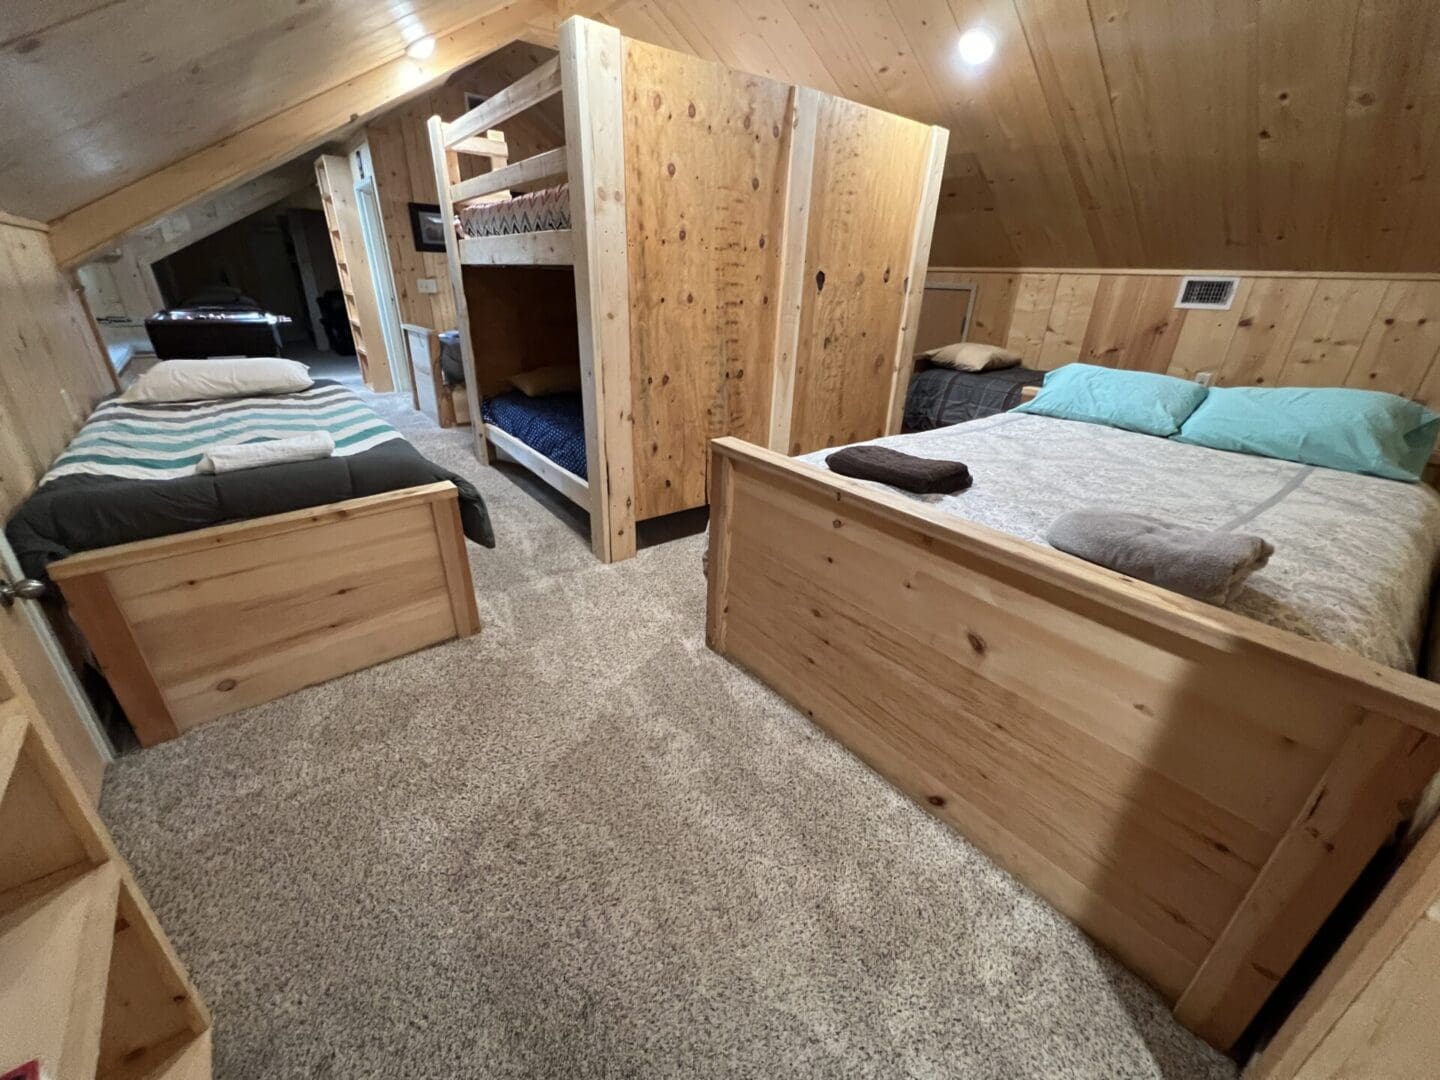 Dorm Room Of A Lodge for Stay